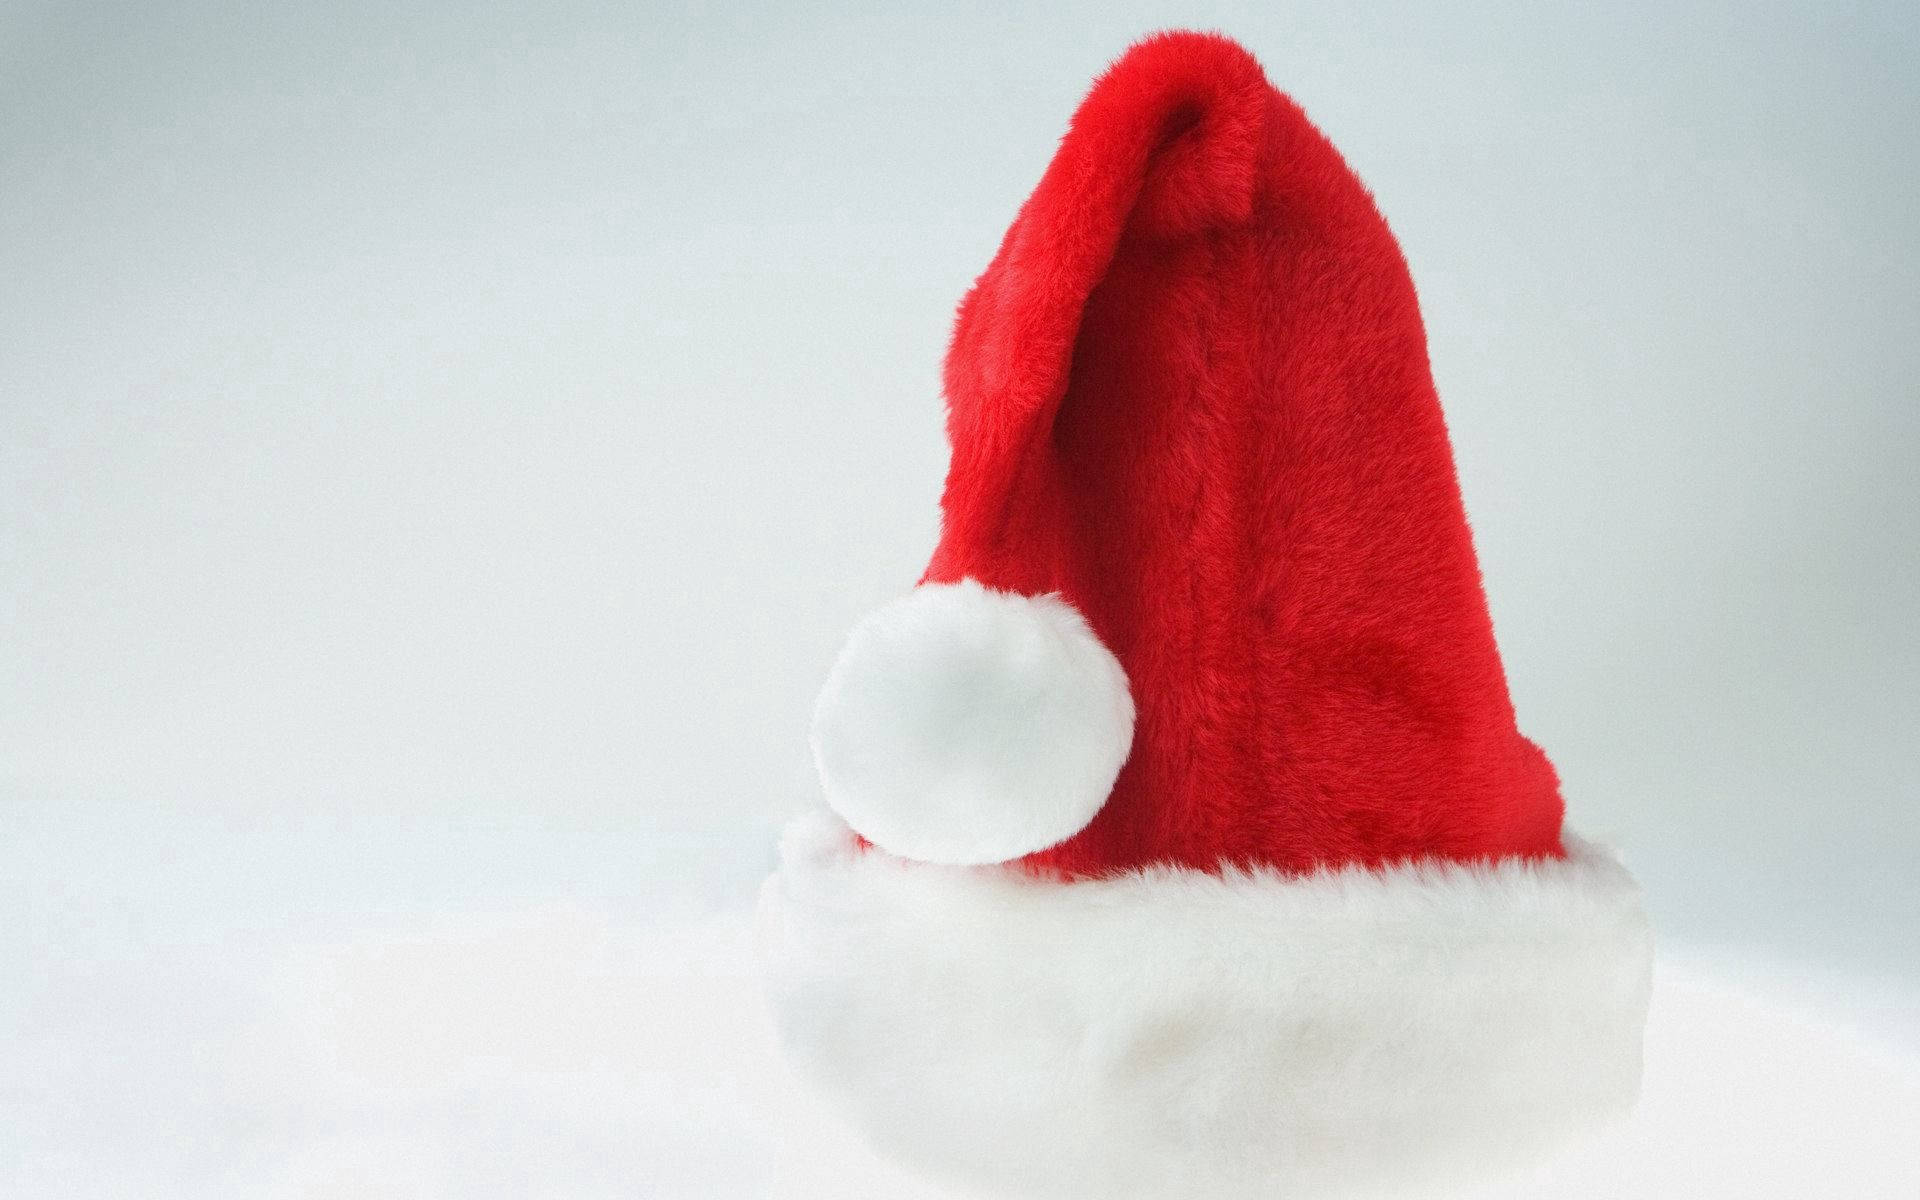 New Year's Red Santa Claus Hat Wallpaper